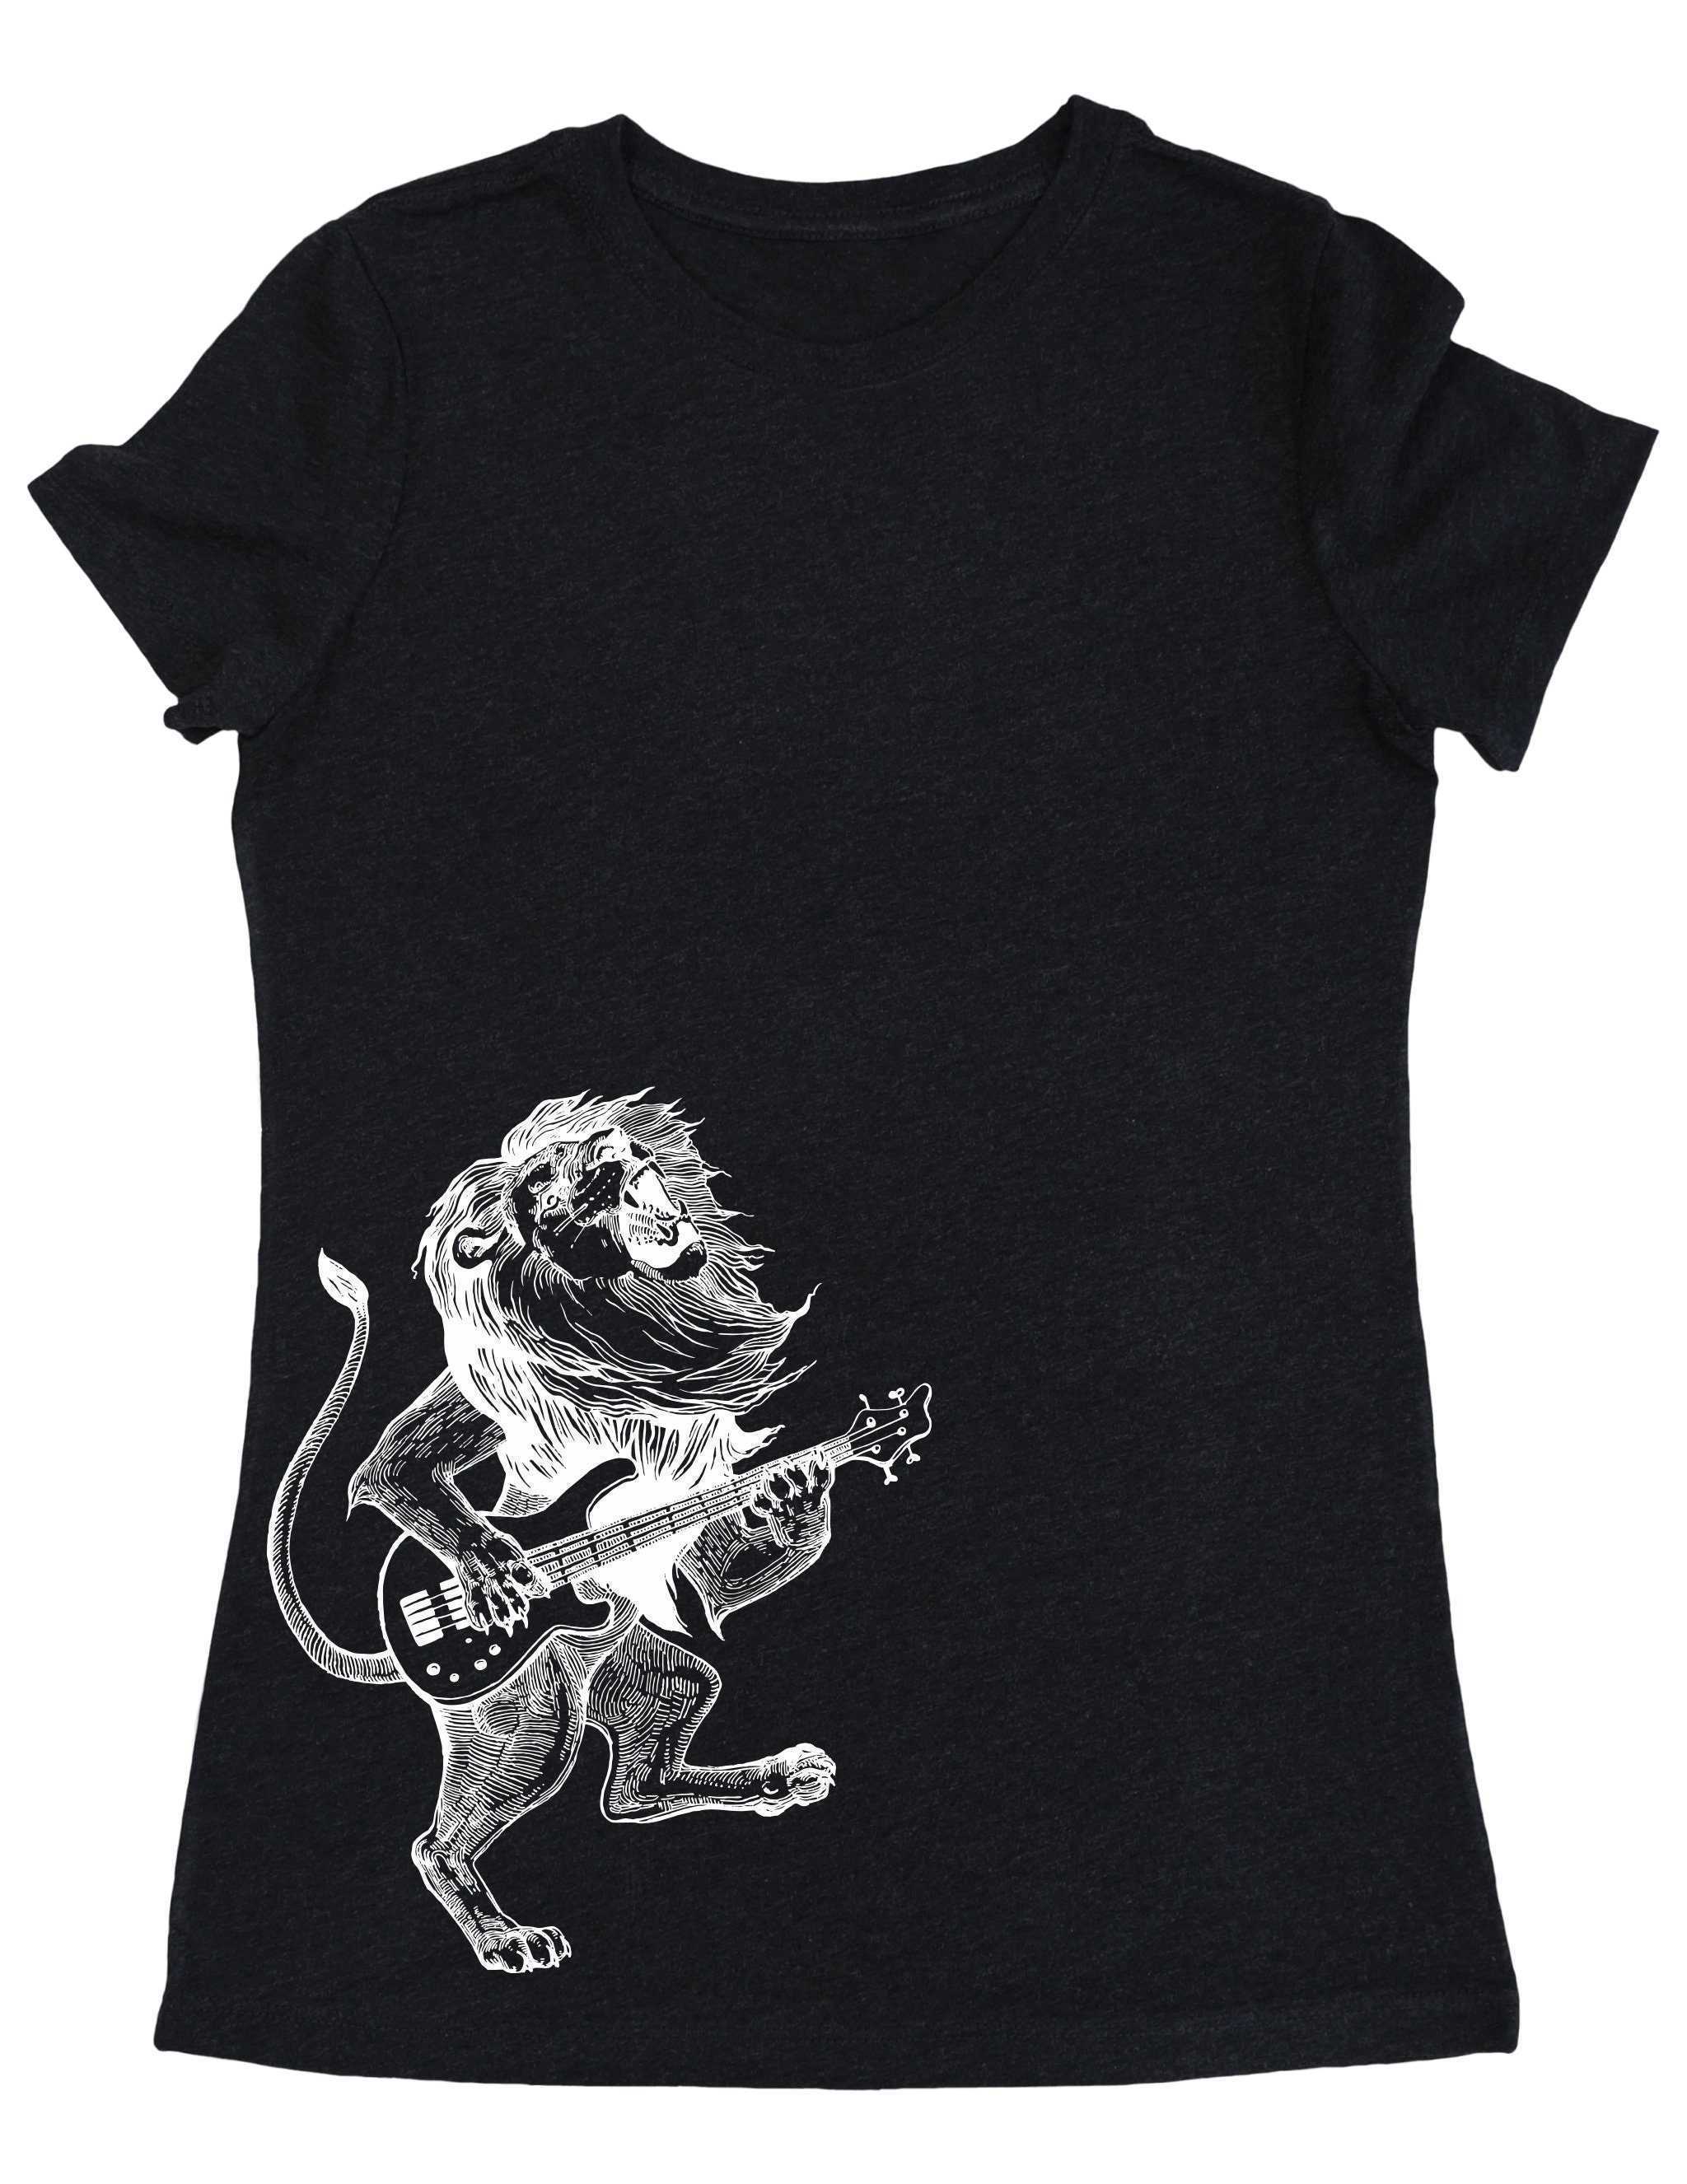 Lion Playing Guitar Women's Tri-Blend T-Shirt Gift For Her, Musician Mom Gift, Girlfriend Birthday, Shirt Wife Gifts Seembo